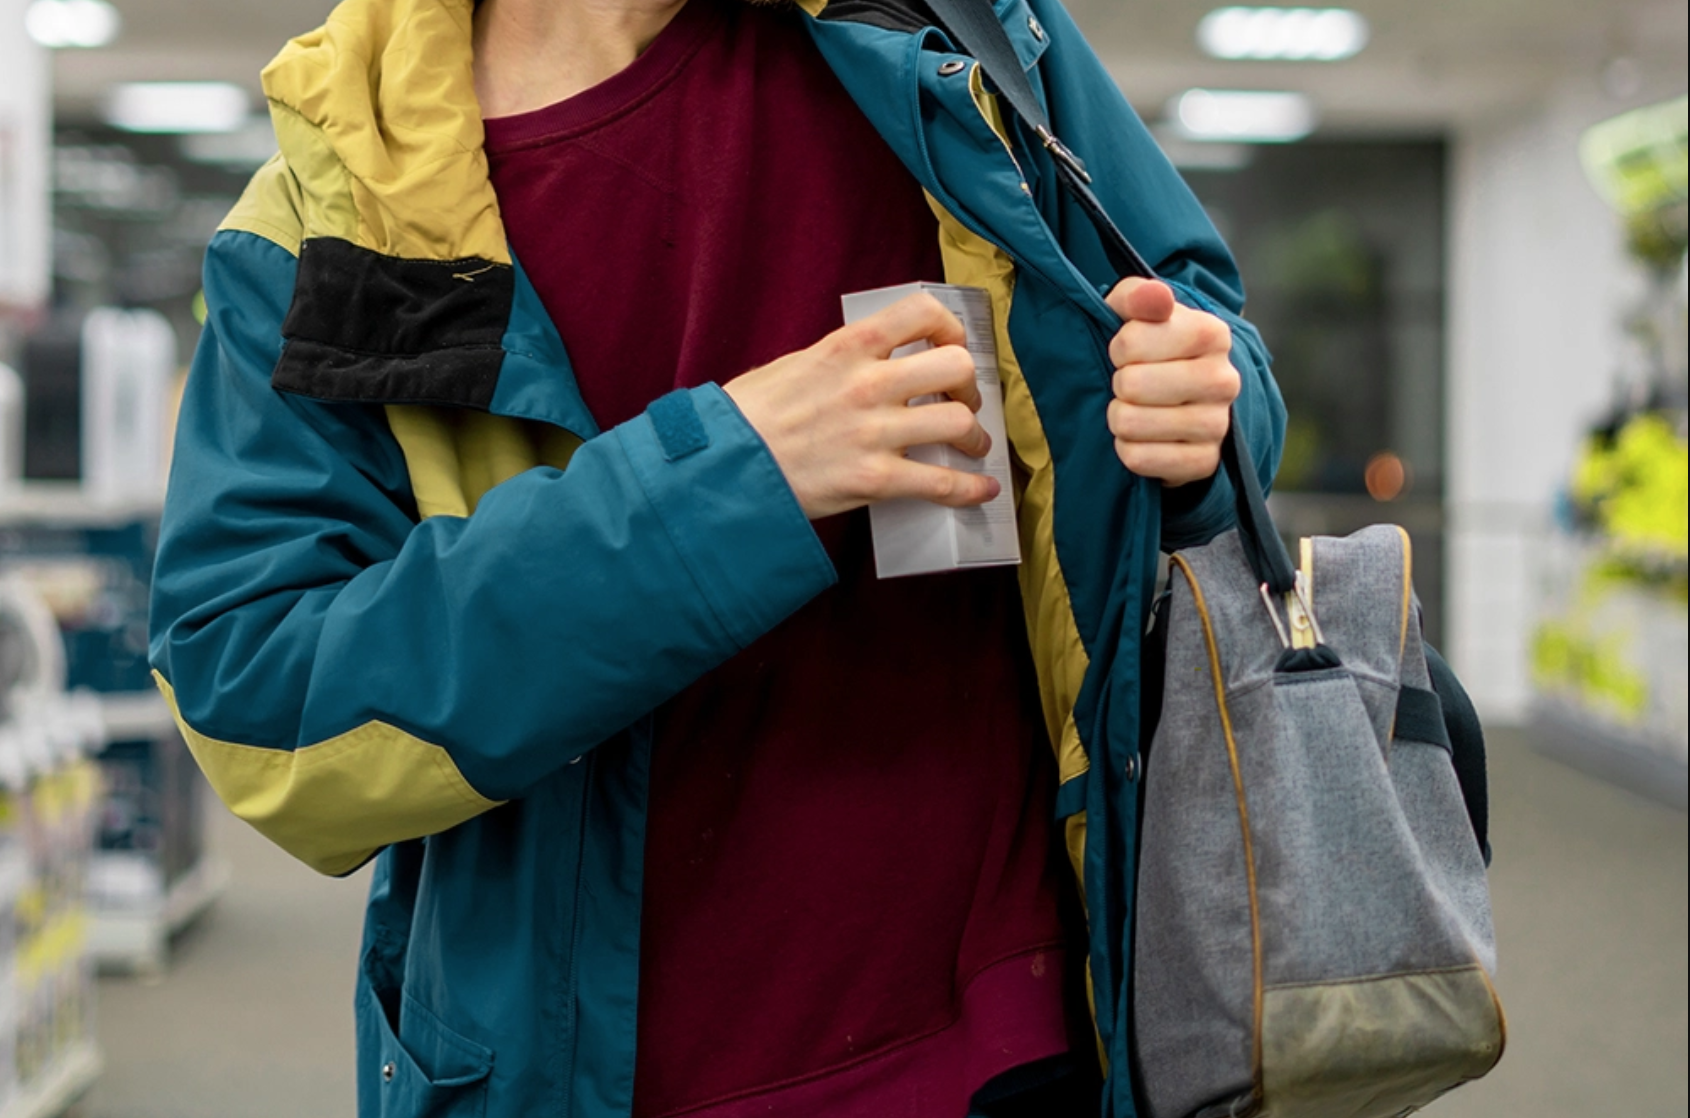 A Shoplifting Primer – What You Need To Know